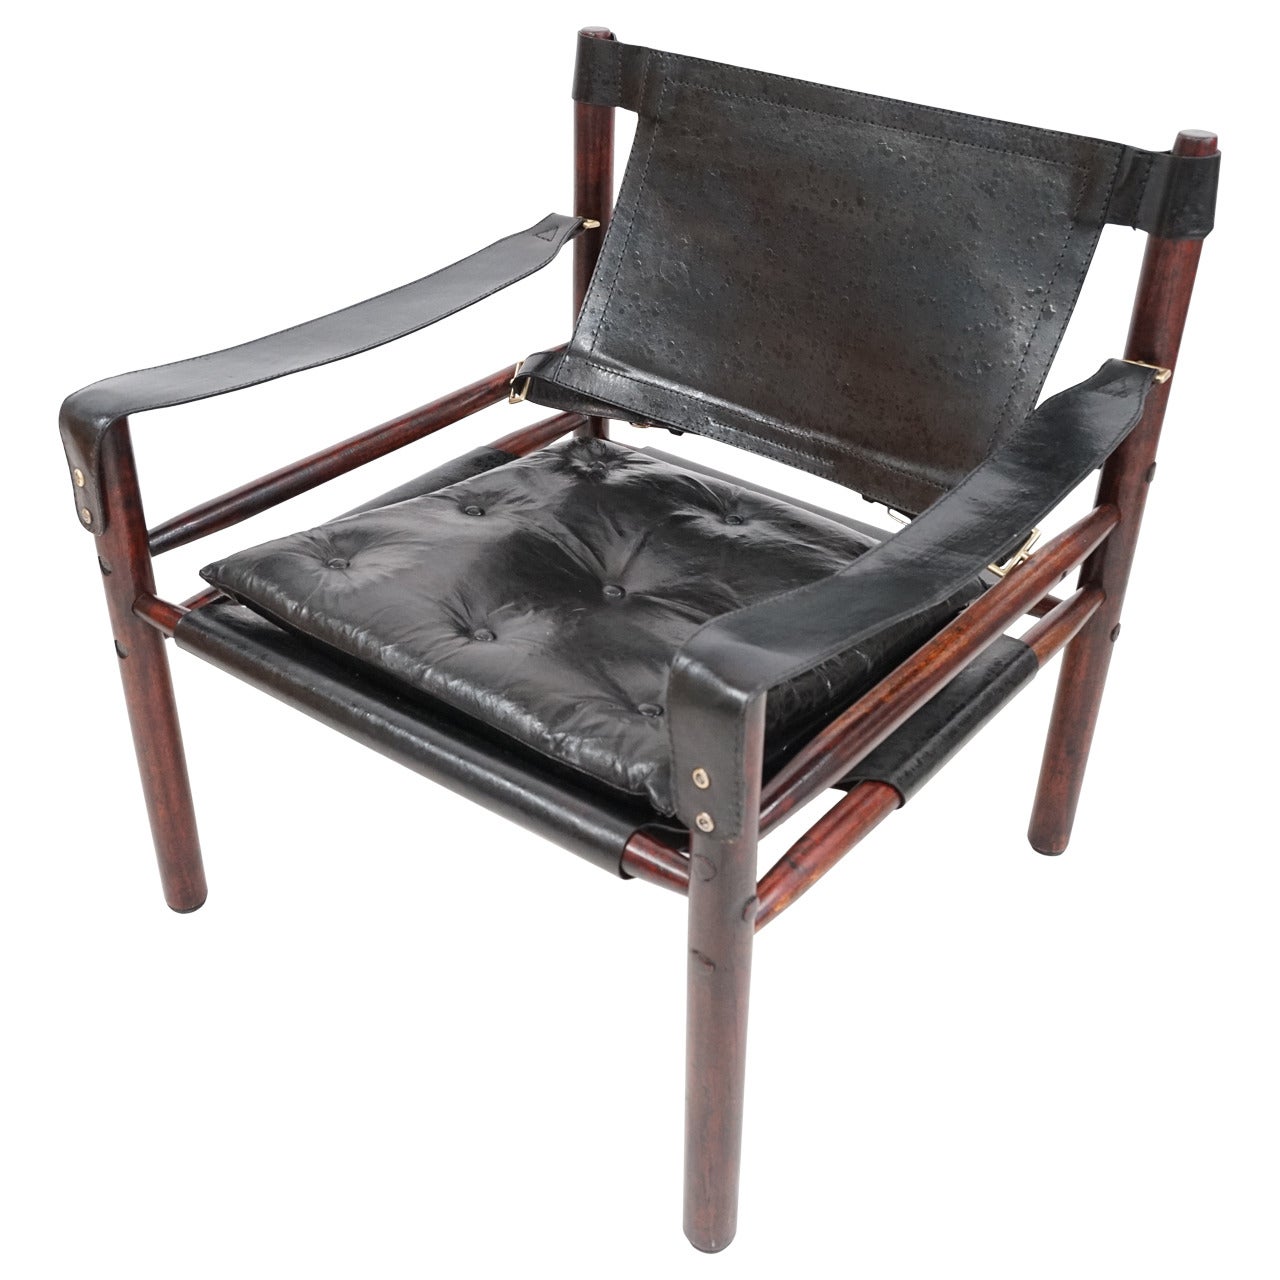 Arne Norell Rosewood and Leather "Sirocco" Safari Chair